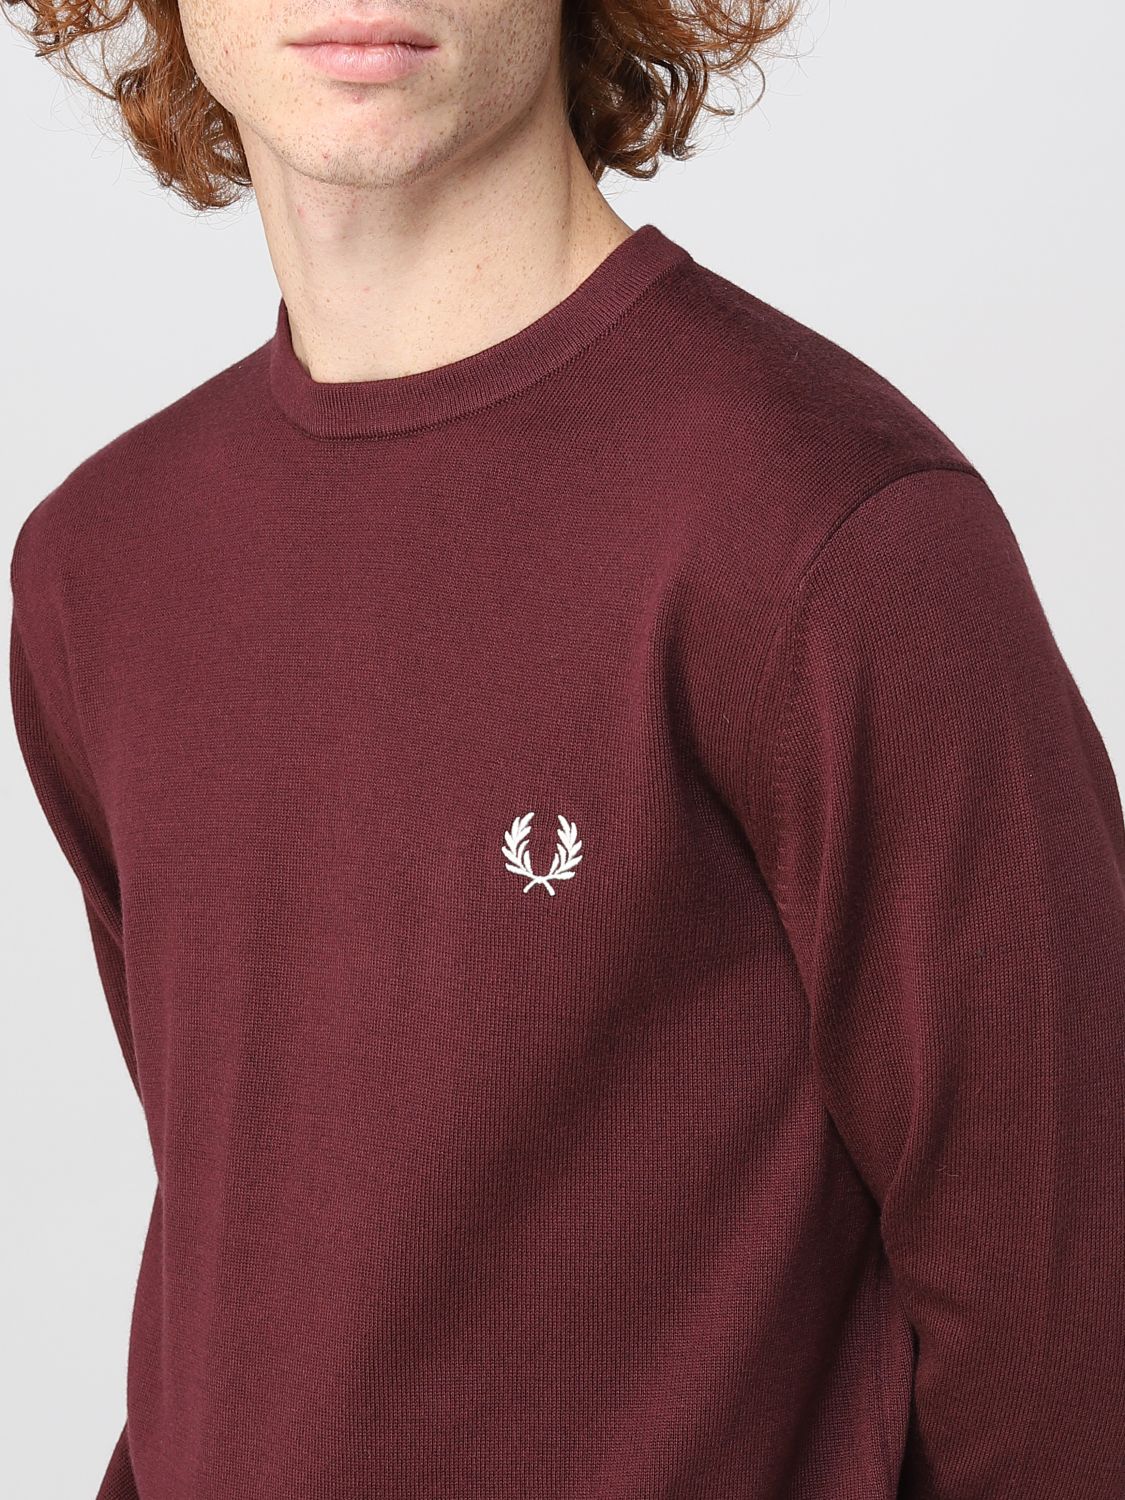 Sweater Fred Perry: Fred Perry sweater for man burgundy 3